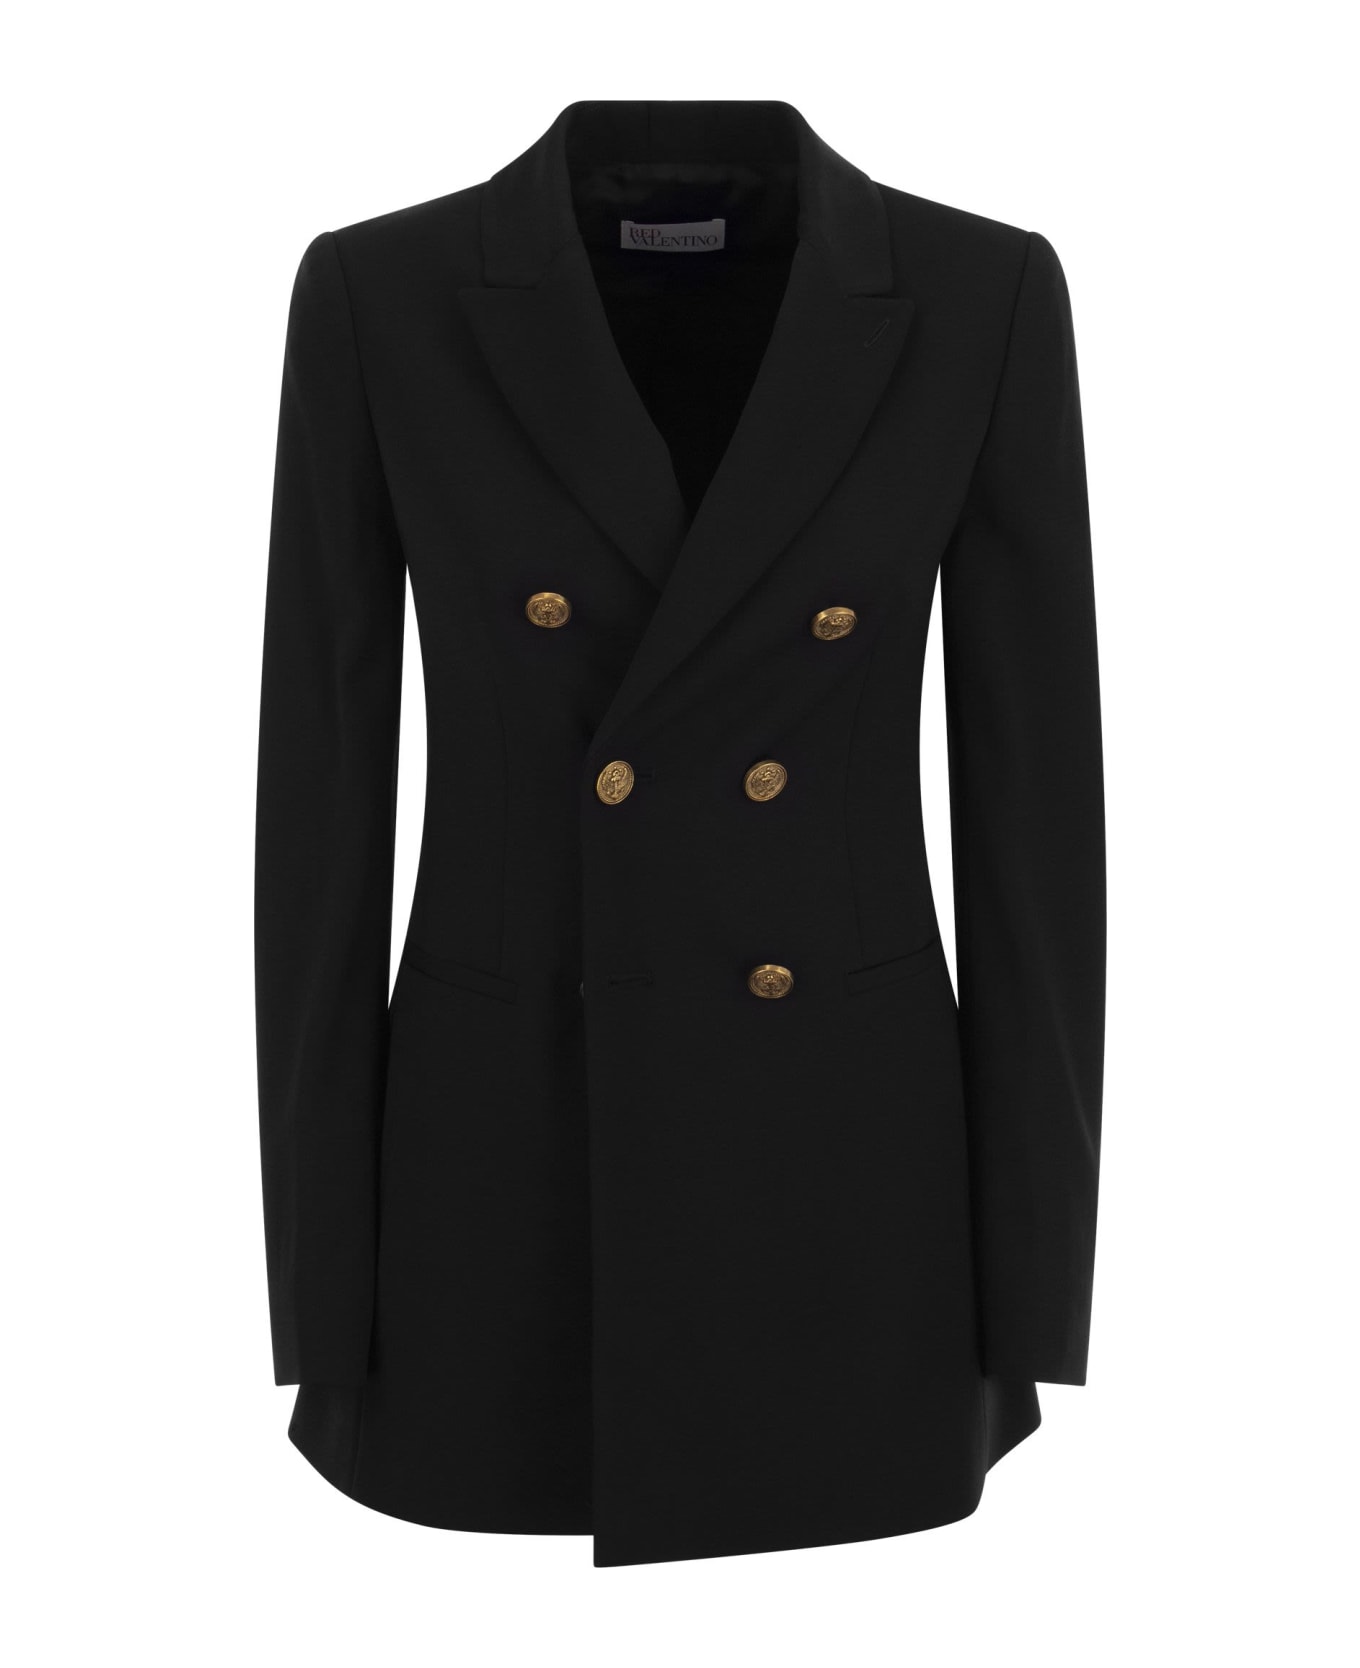 RED Valentino Double-breasted Blazer - Black コート